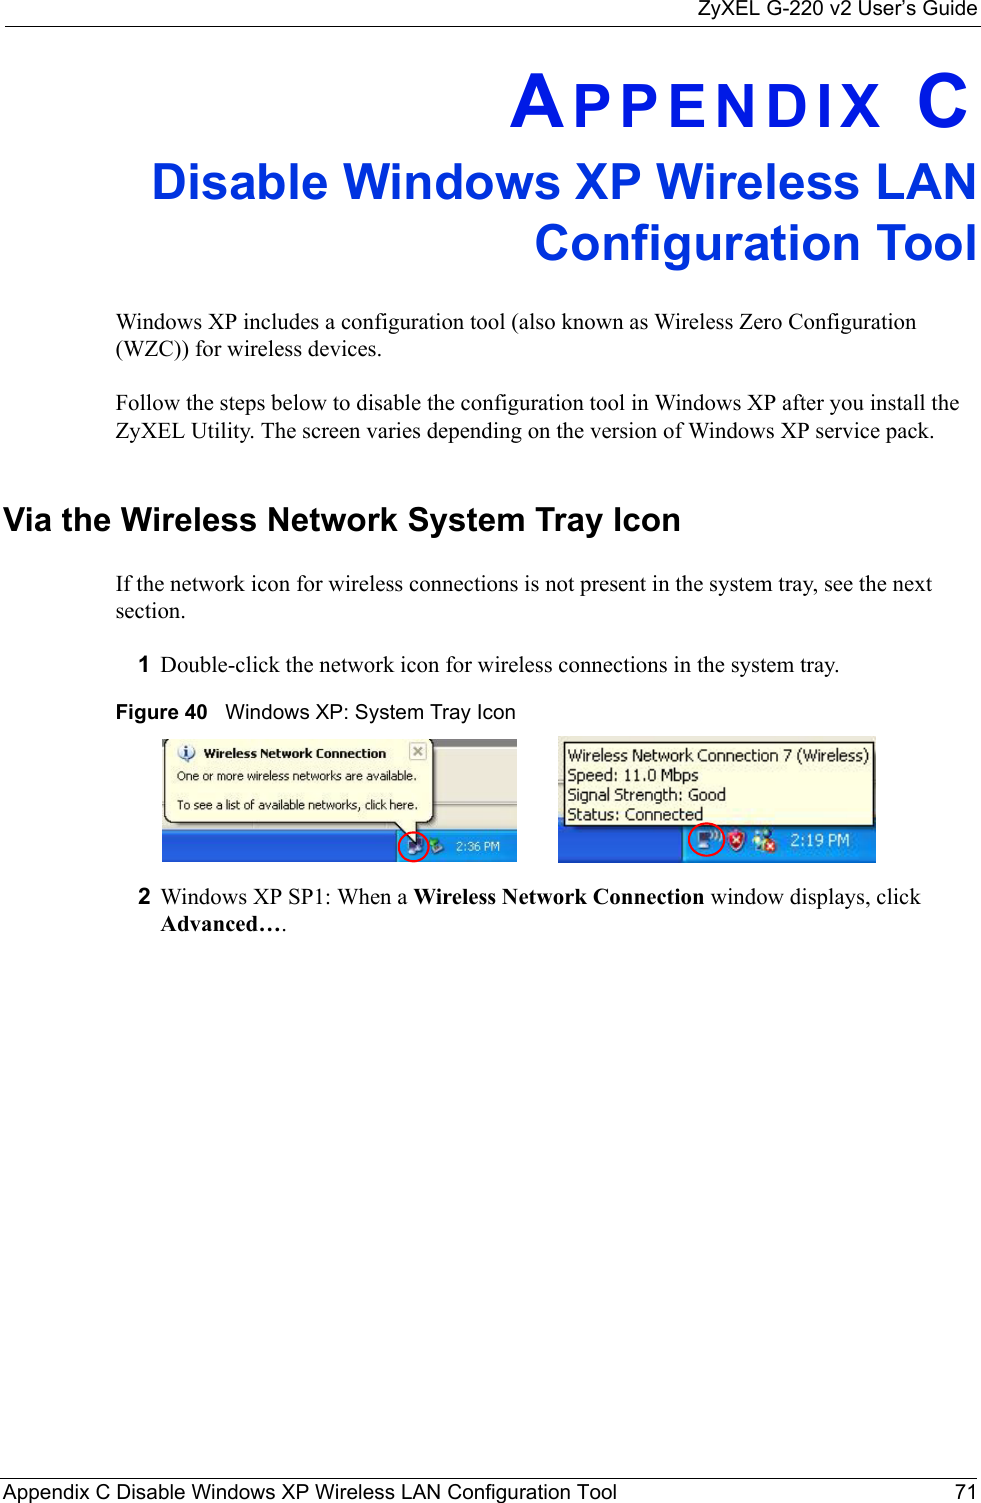 ZyXEL G-220 v2 User’s GuideAppendix C Disable Windows XP Wireless LAN Configuration Tool 71APPENDIX CDisable Windows XP Wireless LANConfiguration ToolWindows XP includes a configuration tool (also known as Wireless Zero Configuration (WZC)) for wireless devices. Follow the steps below to disable the configuration tool in Windows XP after you install the ZyXEL Utility. The screen varies depending on the version of Windows XP service pack.Via the Wireless Network System Tray IconIf the network icon for wireless connections is not present in the system tray, see the next section.1Double-click the network icon for wireless connections in the system tray. Figure 40   Windows XP: System Tray Icon2Windows XP SP1: When a Wireless Network Connection window displays, click Advanced…. 